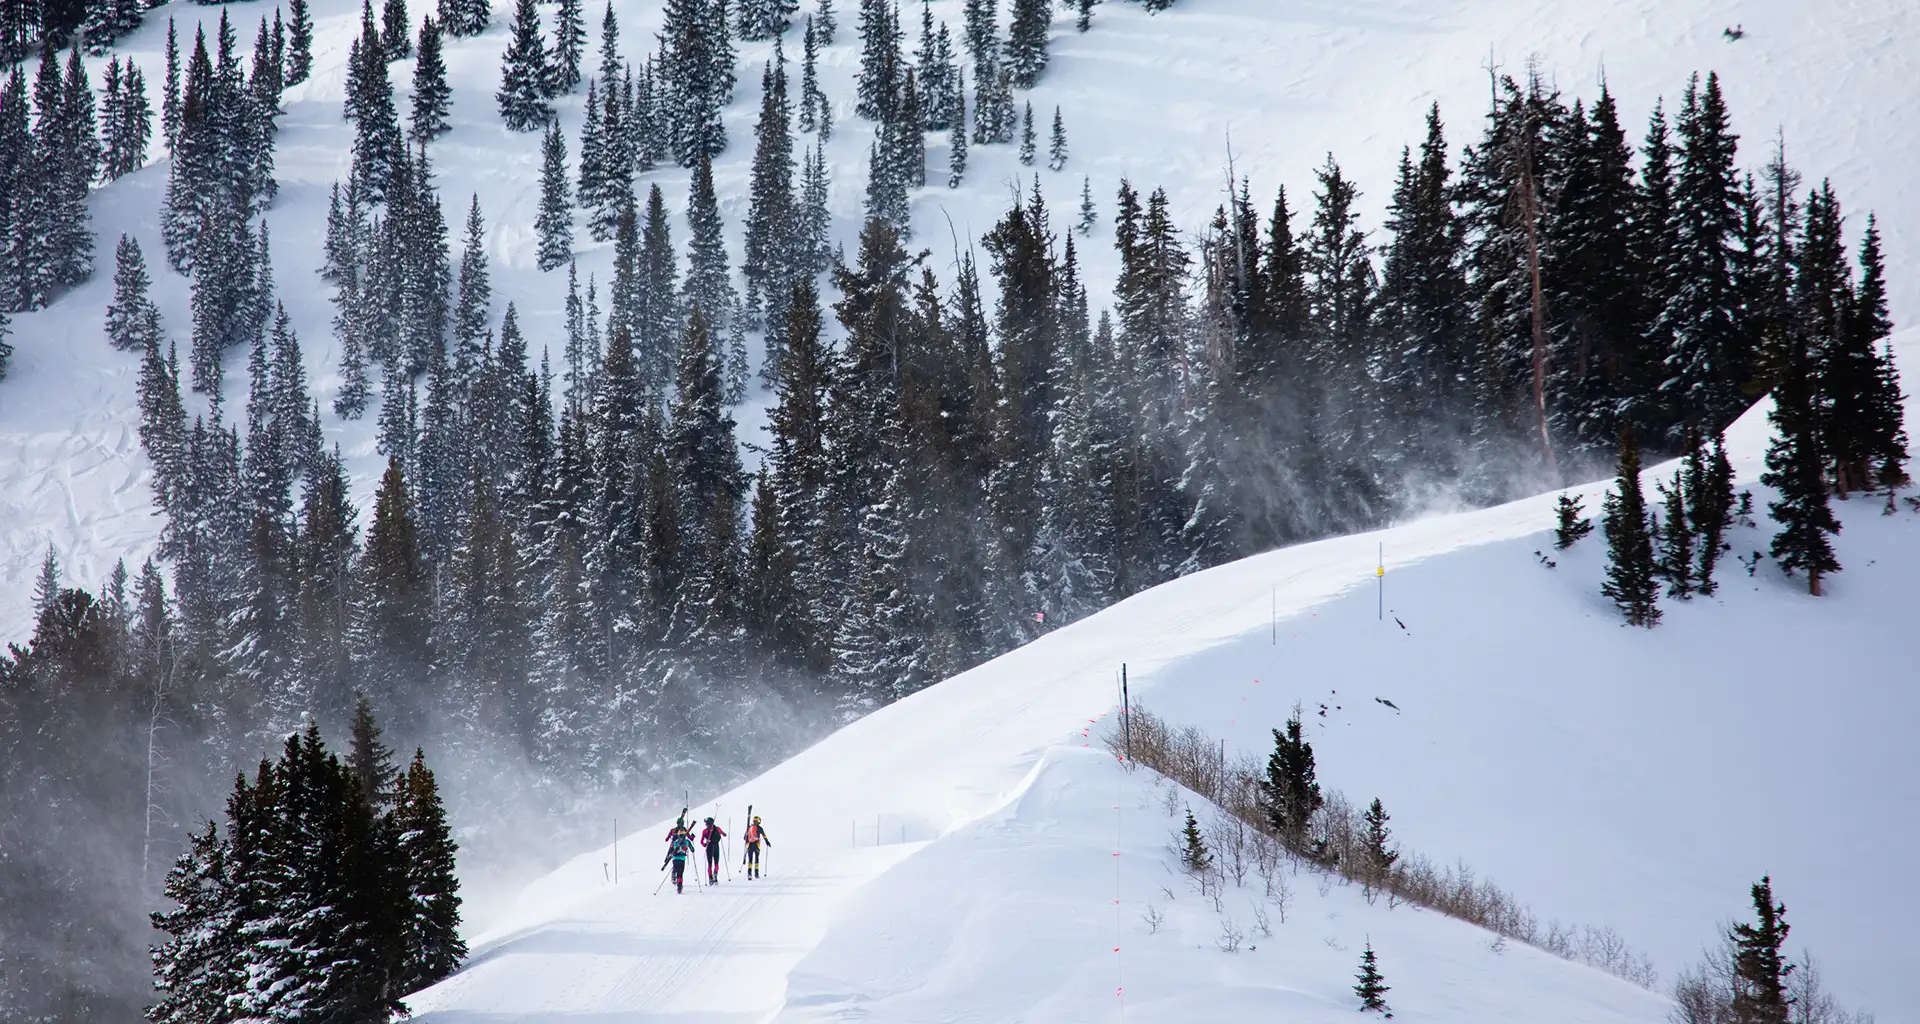 Skiers climbing up Aspen Highlands' famous Highland Bowl during the Audi Power of Four Ski Mountaineering Race.